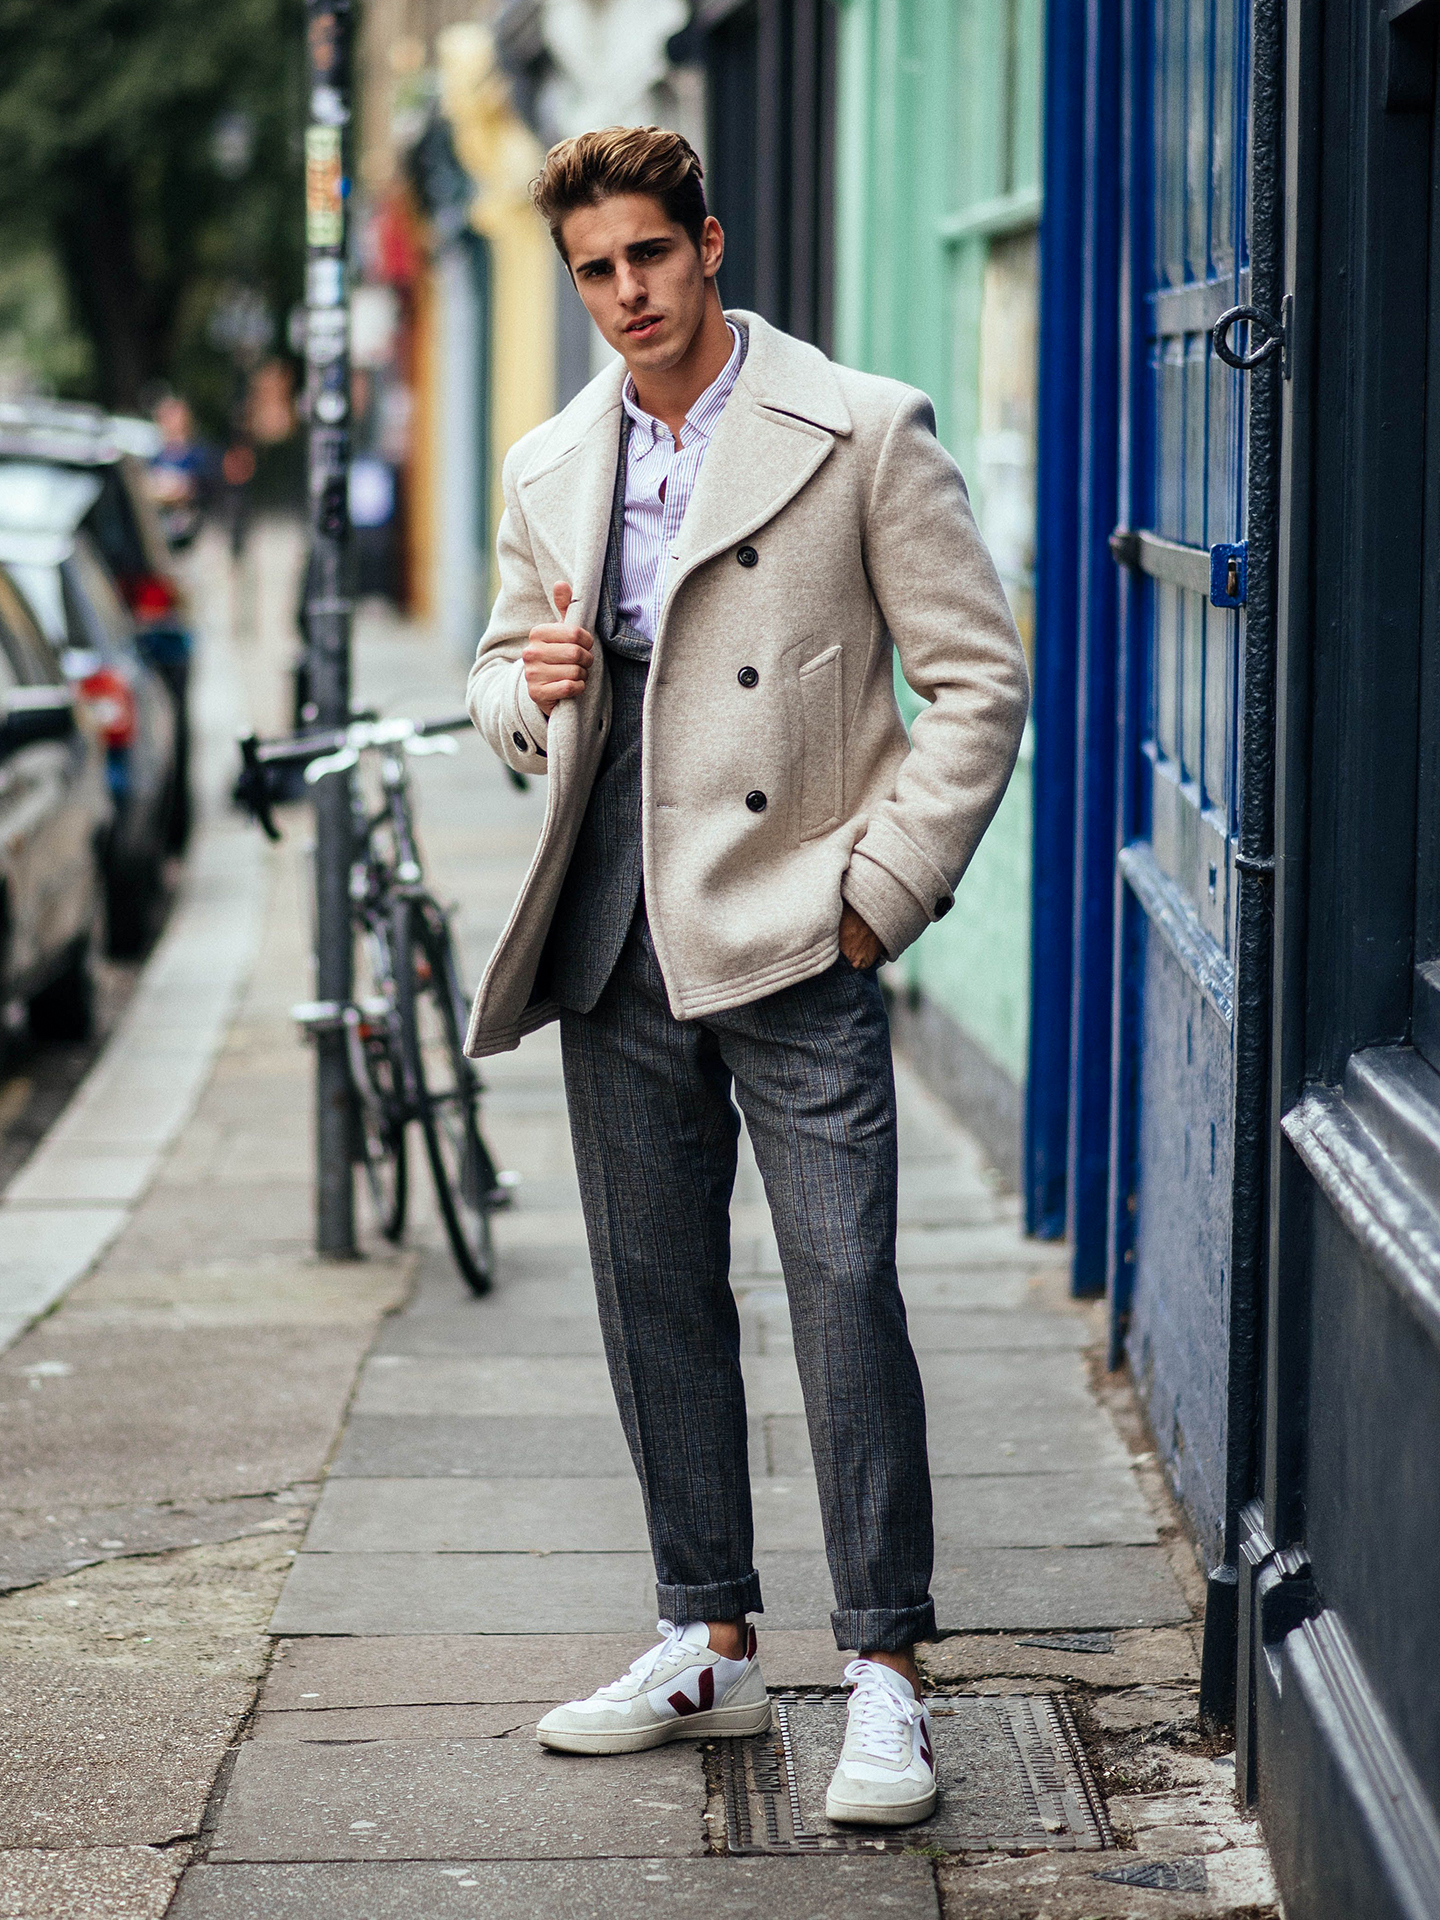 beige peacoat, casual grey suit, and striped button-down shirt